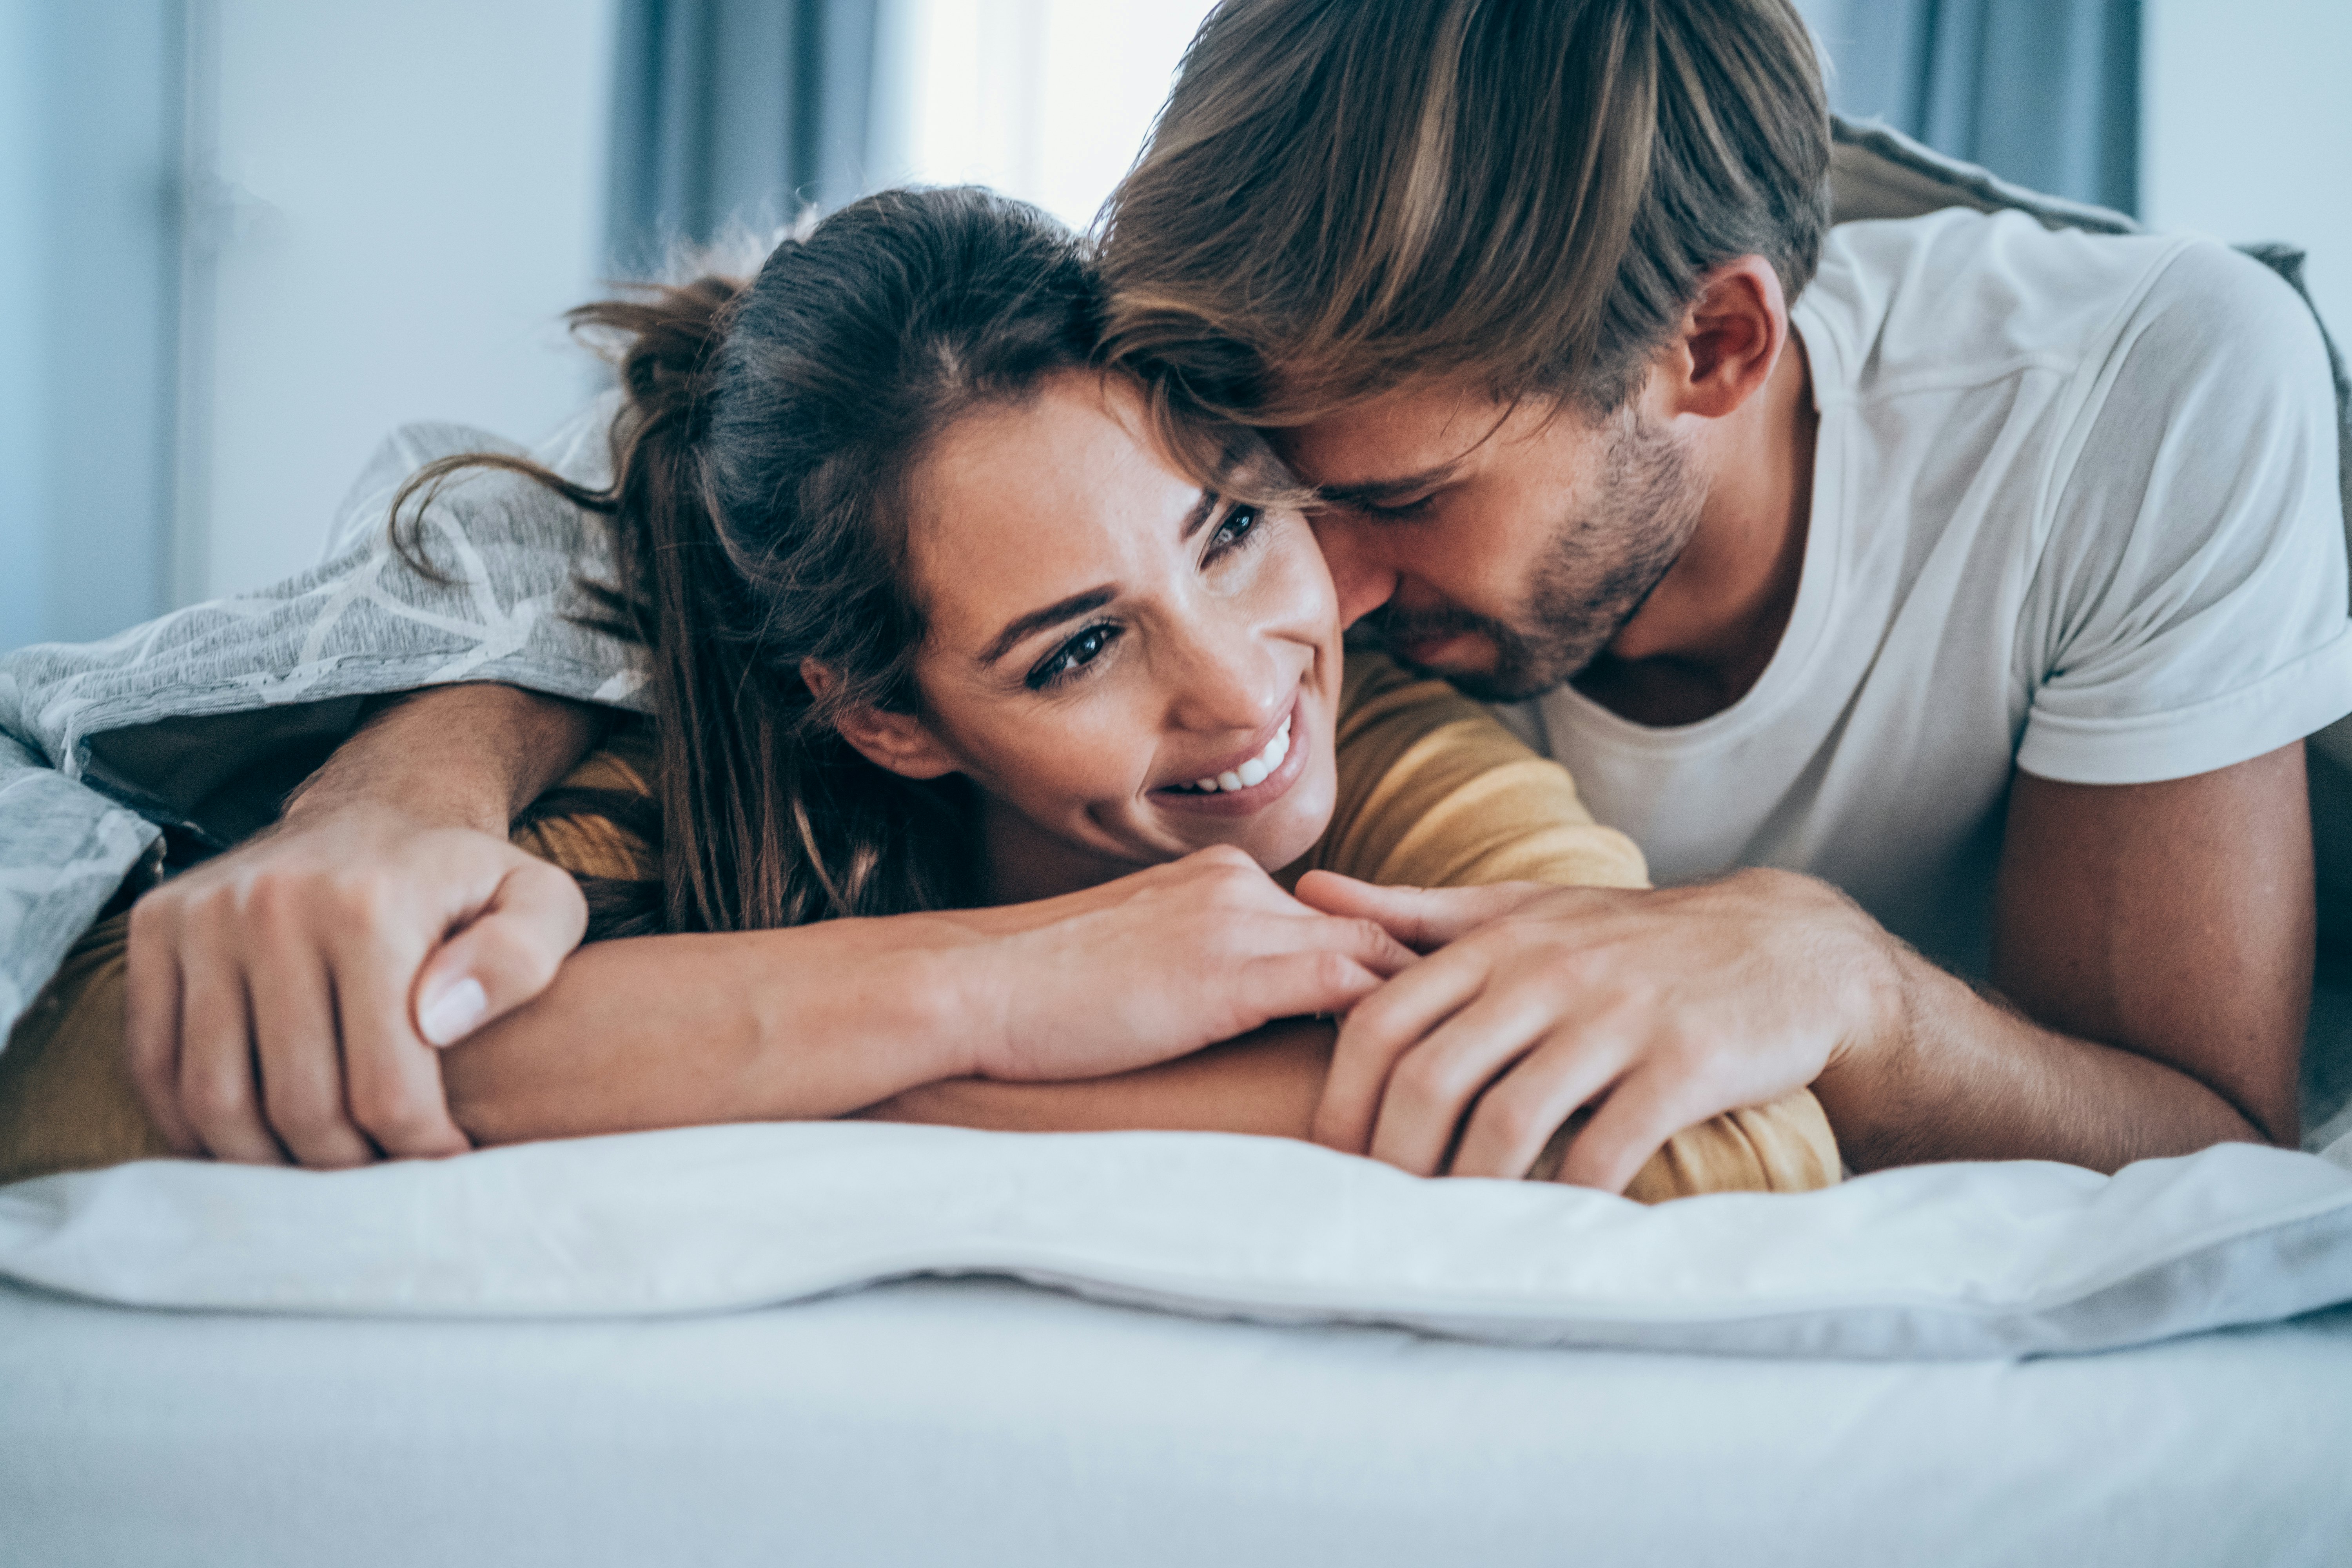 What Men Want In Bed 8 Surprising Insights From Sex Research